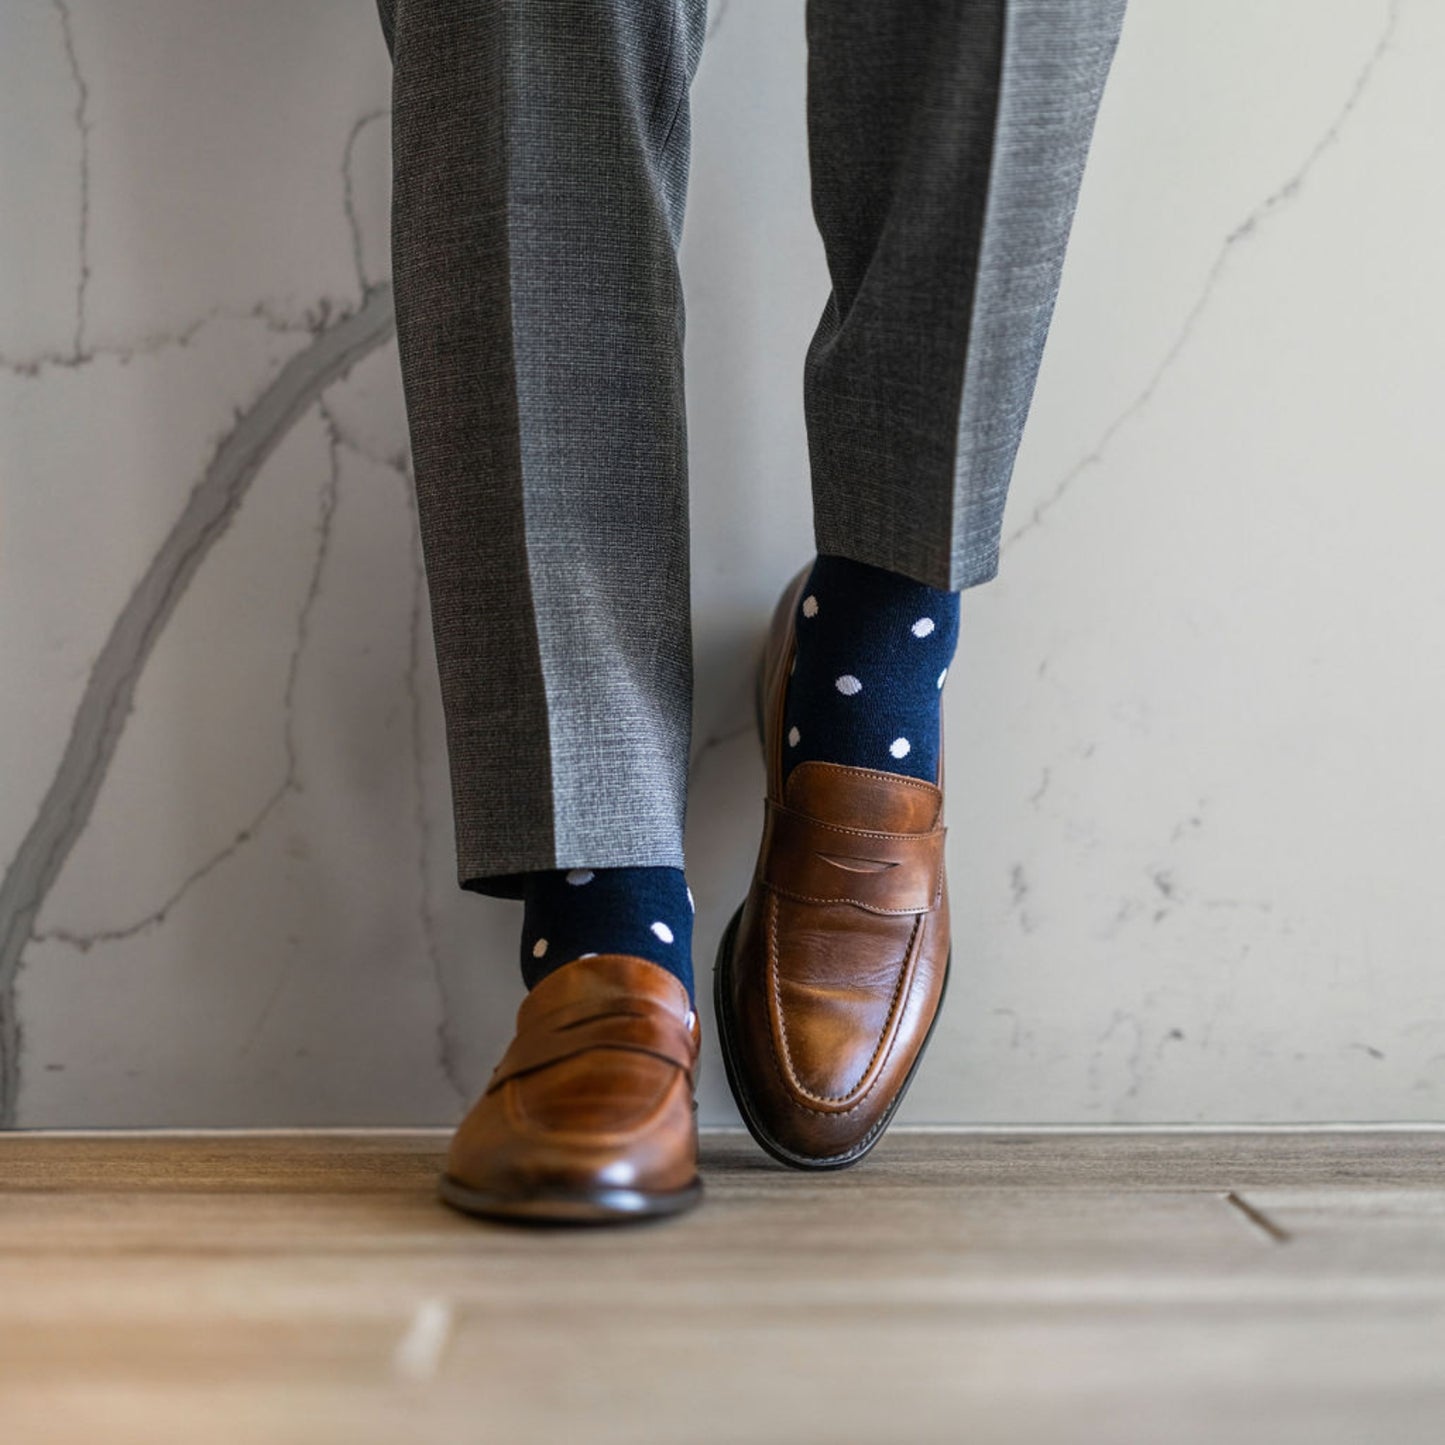 Man wearing grey pants, navy blue socks with white polka dots, and brown dress shoes.